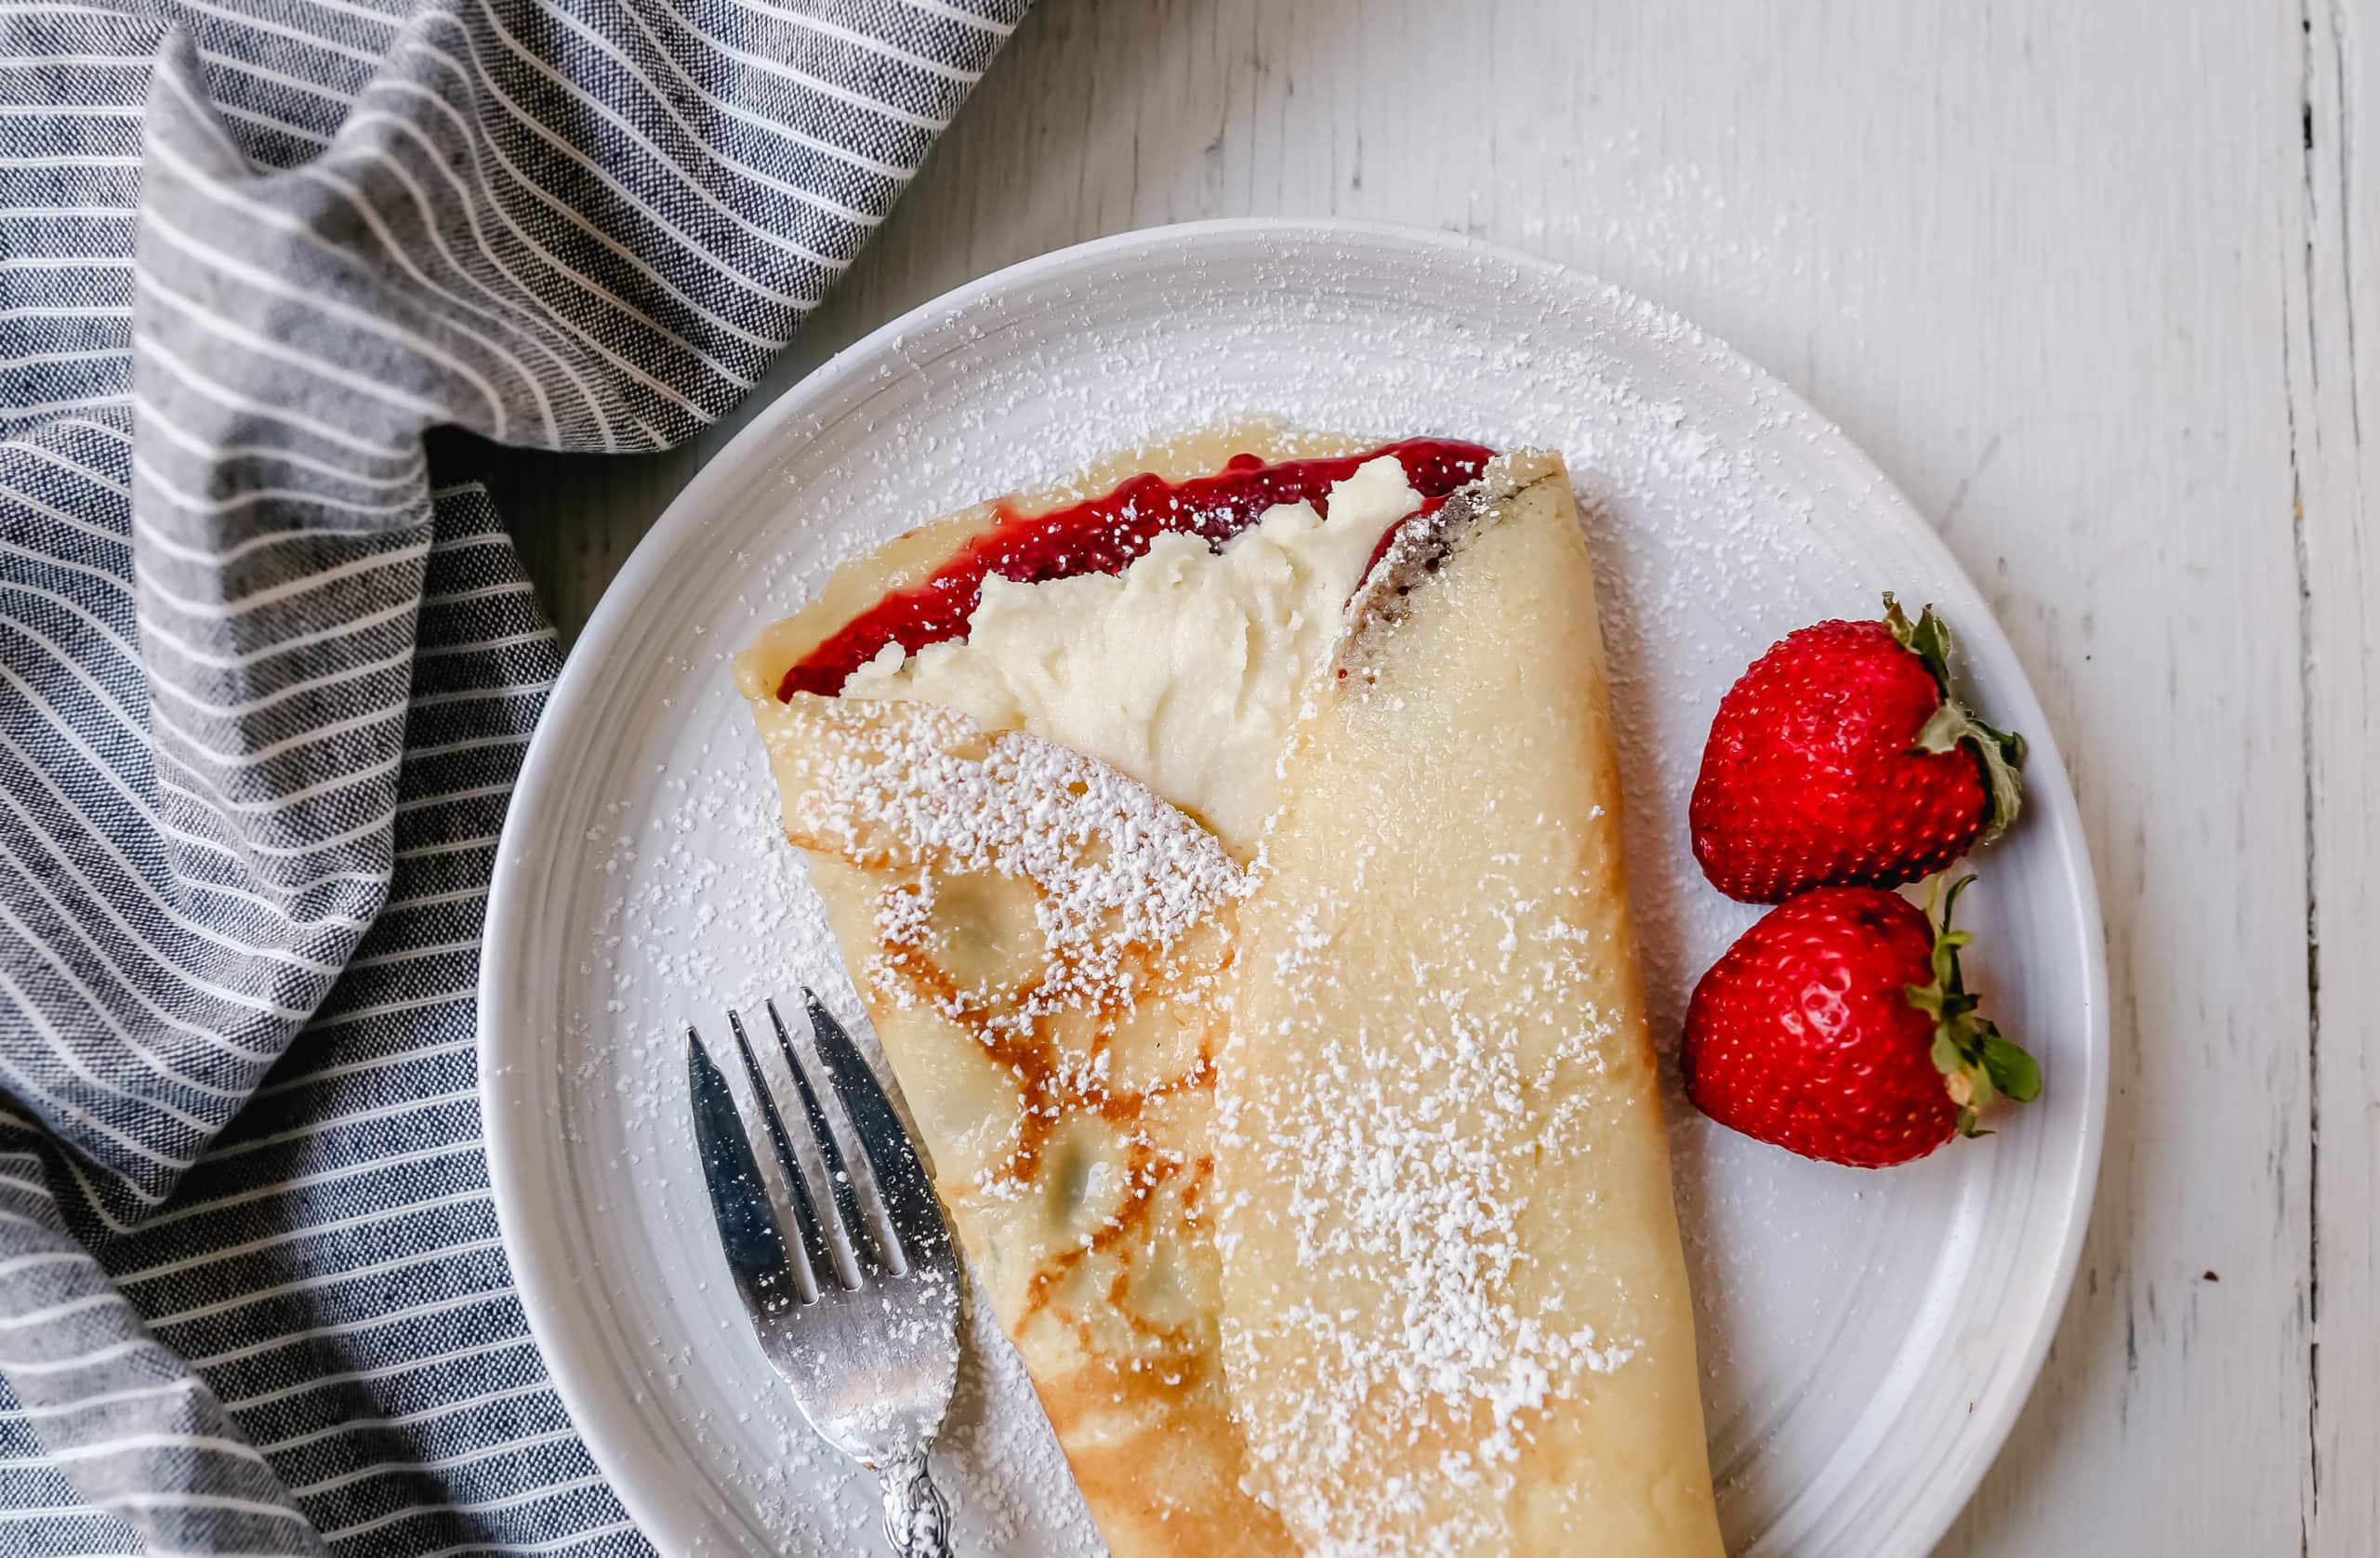 The Best Crepes Recipe. An easy homemade crepe recipe made with simple ingredients -- milk, flour, eggs, sugar, water, and butter. Simple 6-ingredient crepe recipe!  #crepes #crepe #breakfast